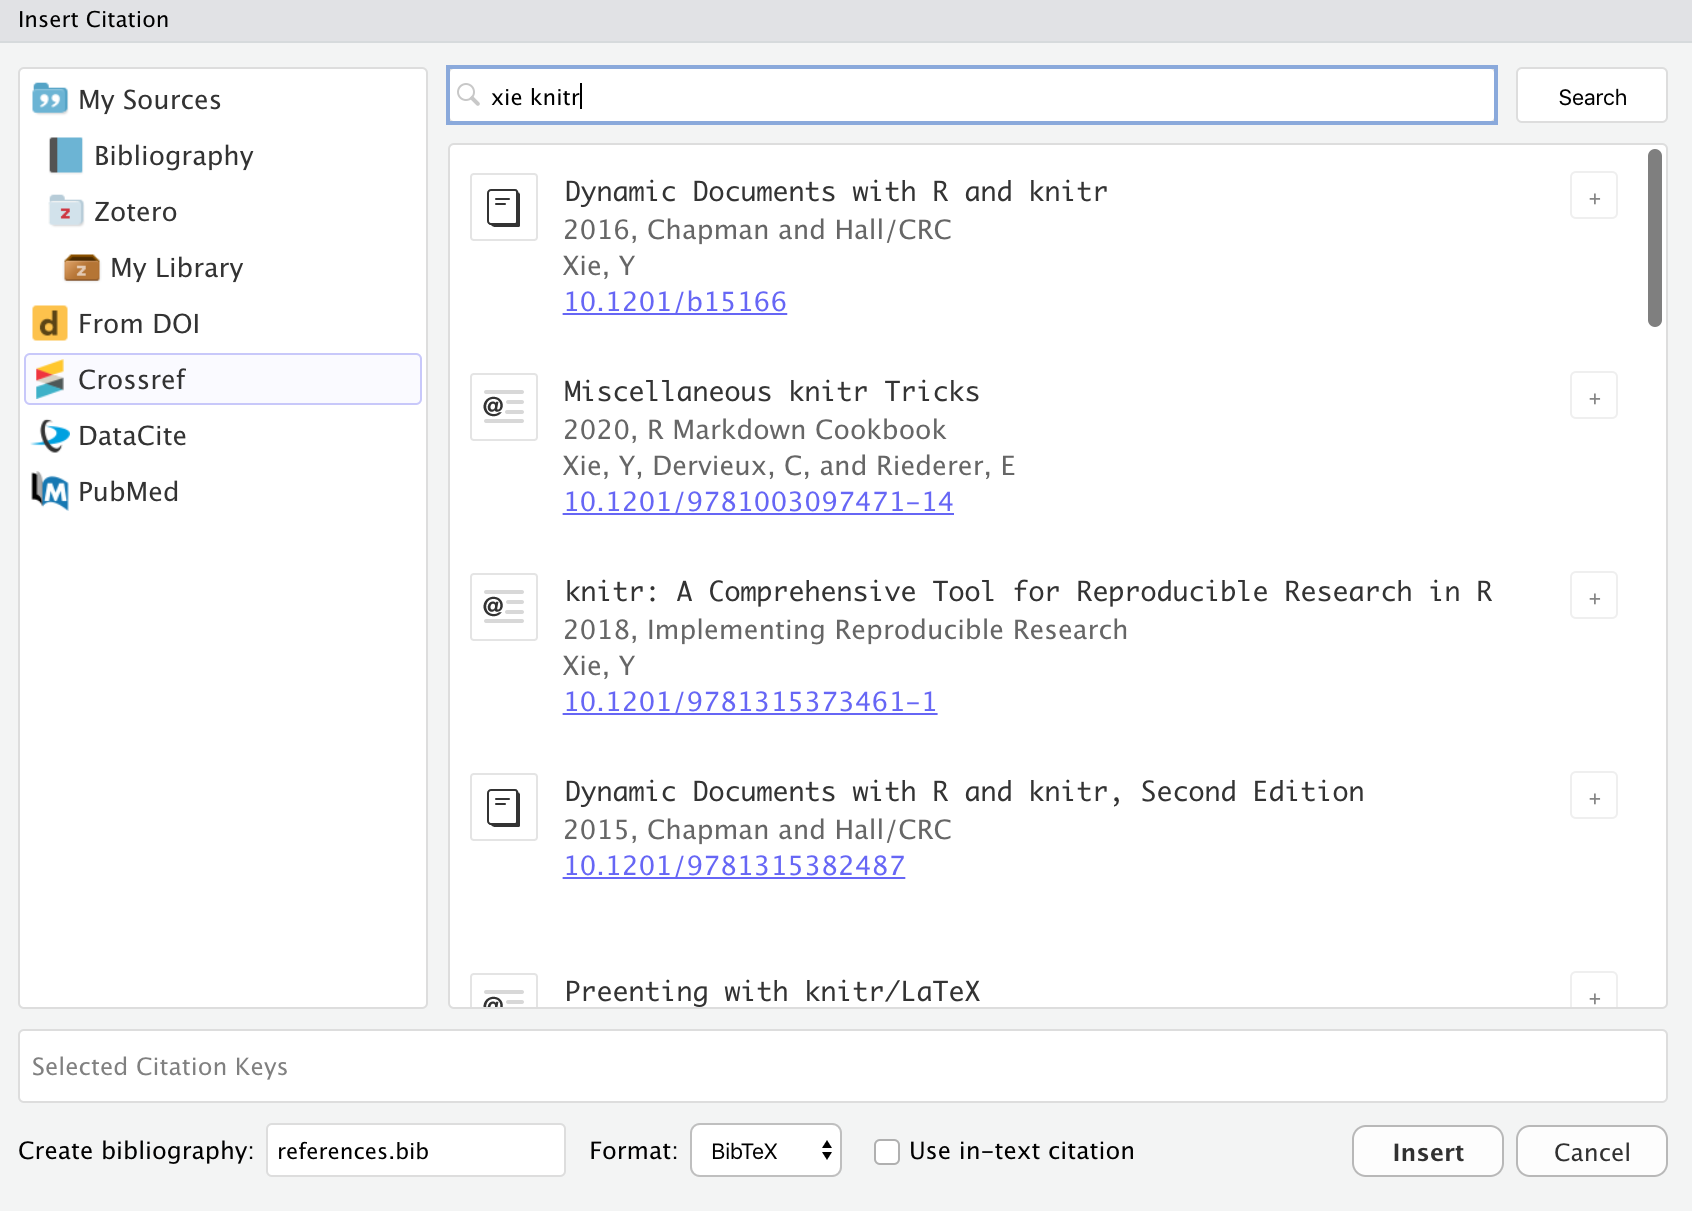 The 'Insert Citation' window in RStudio. The 'Crossref' option is selected and the text 'xie knitr' is in the search bar at the top of the section on the right. In the search pane are the search results.